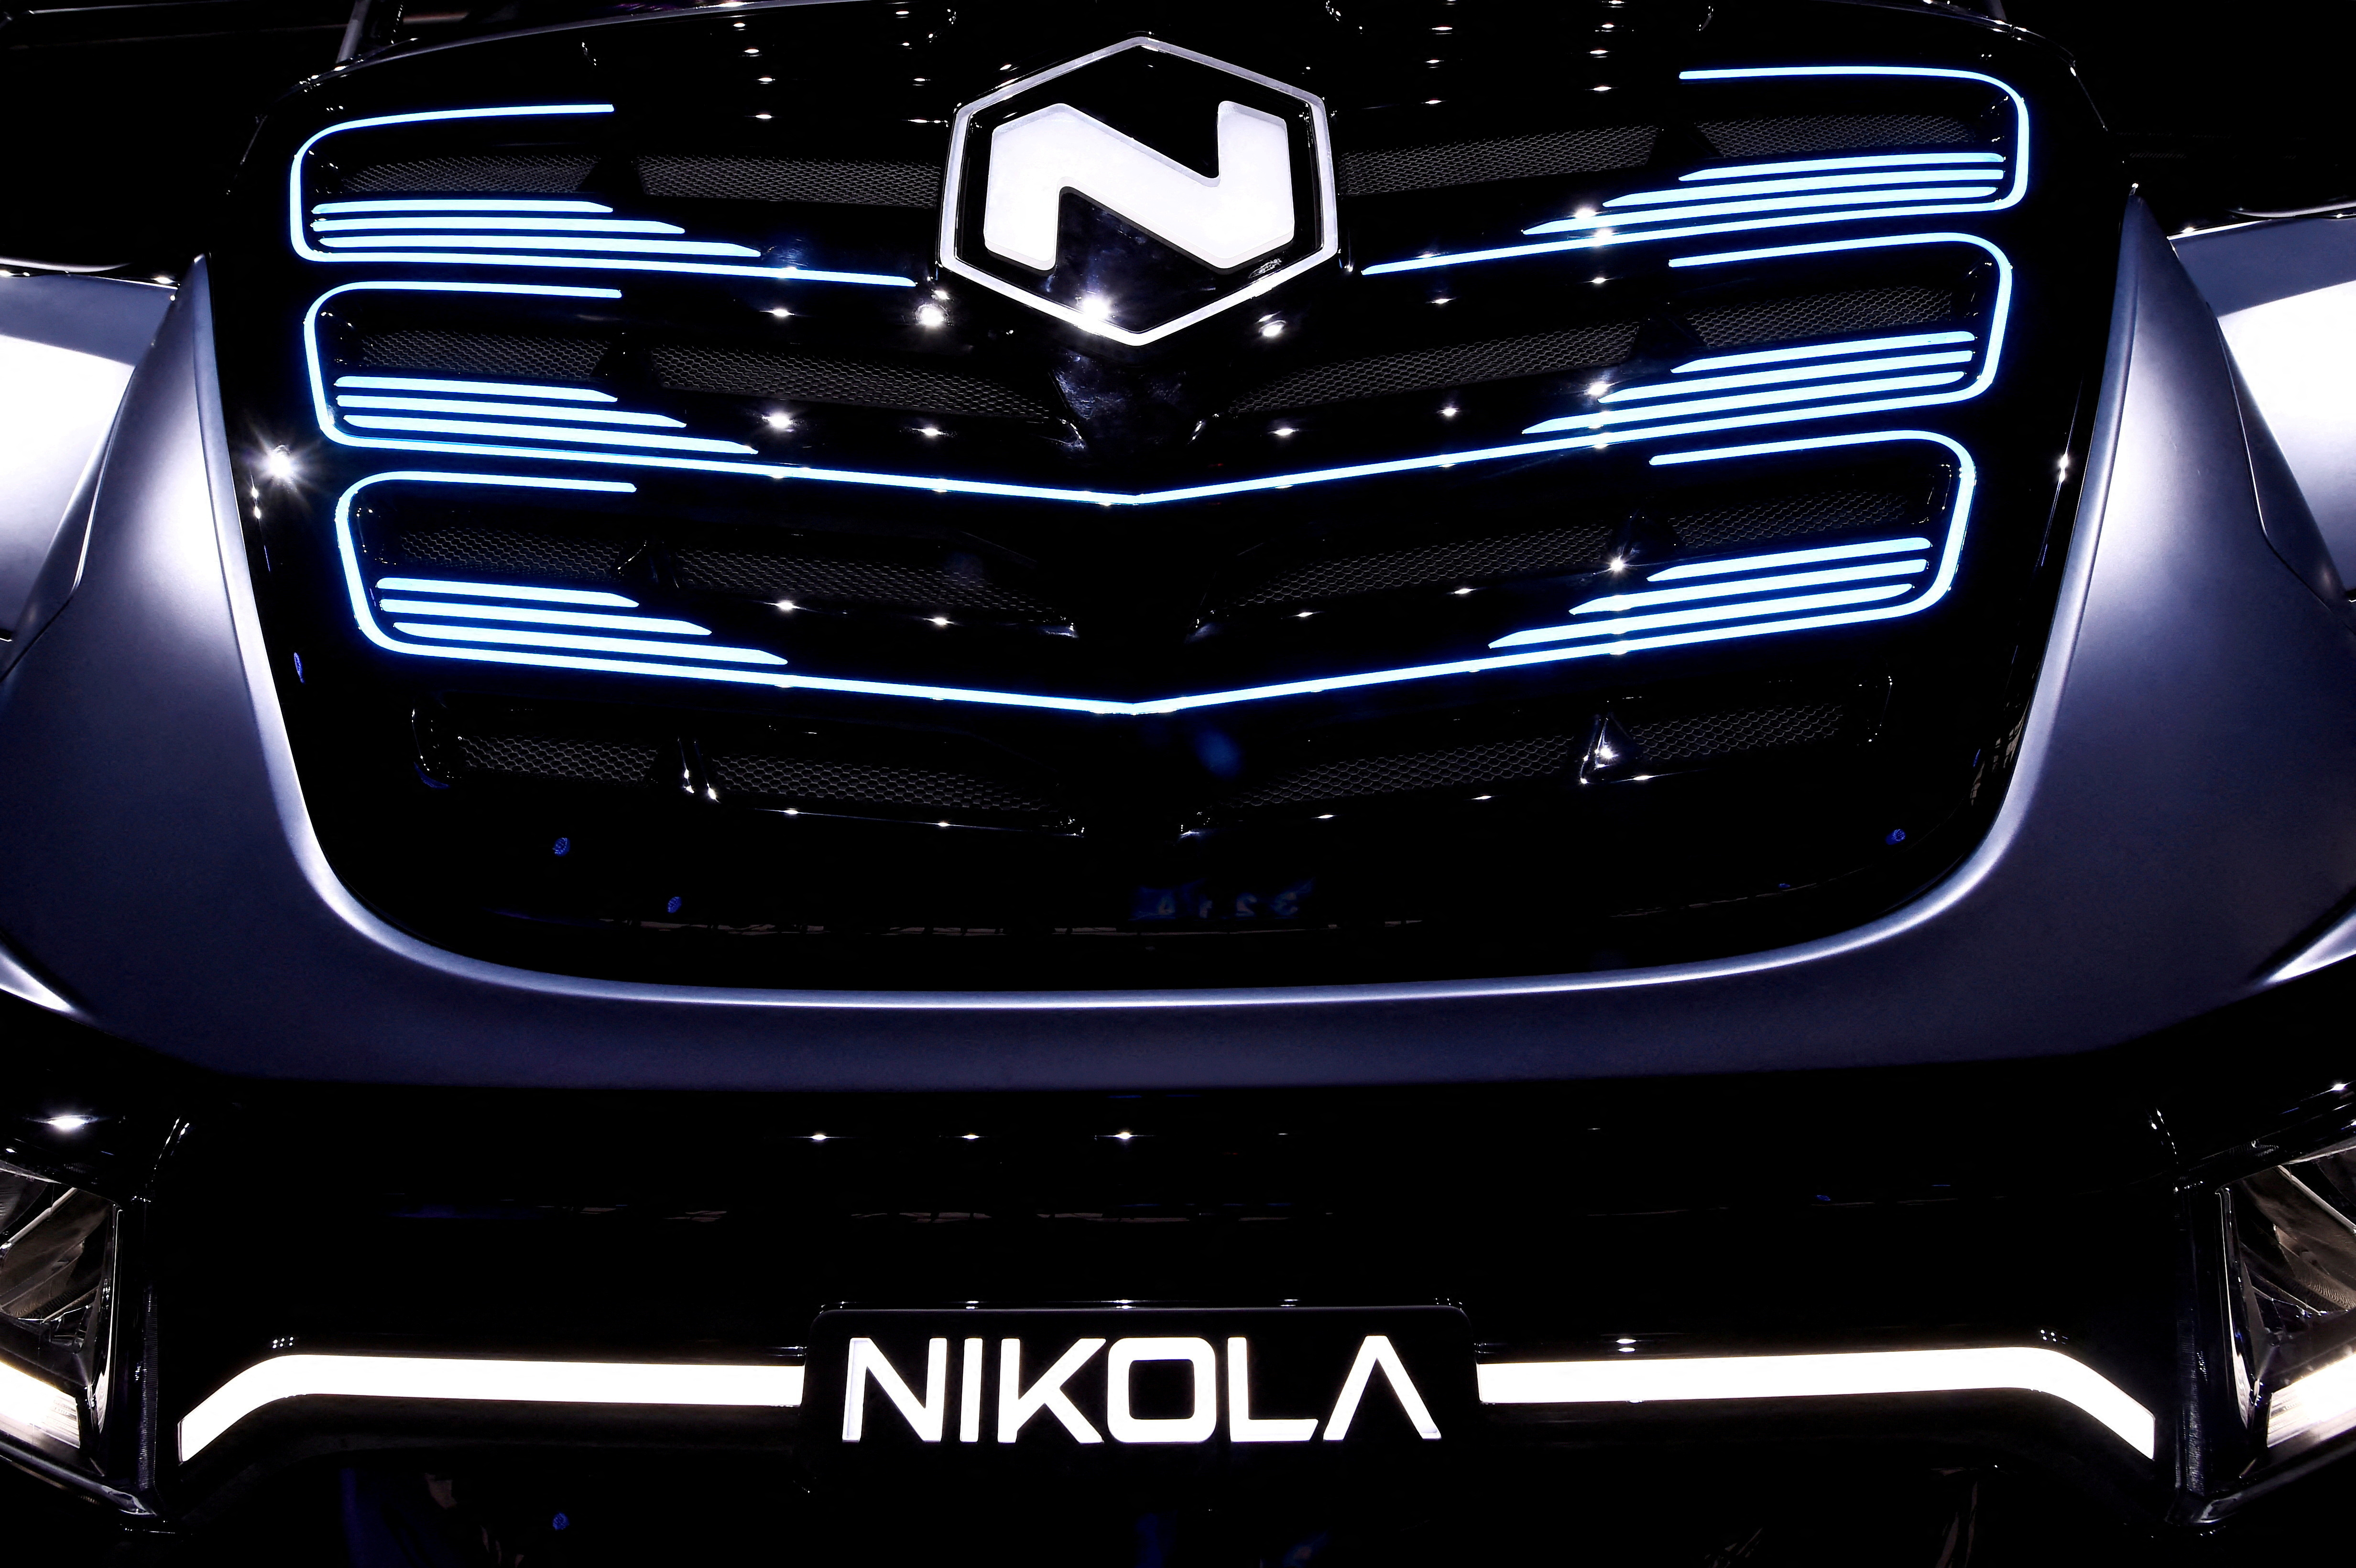 Nikola's logo is pictured at an event in Turin